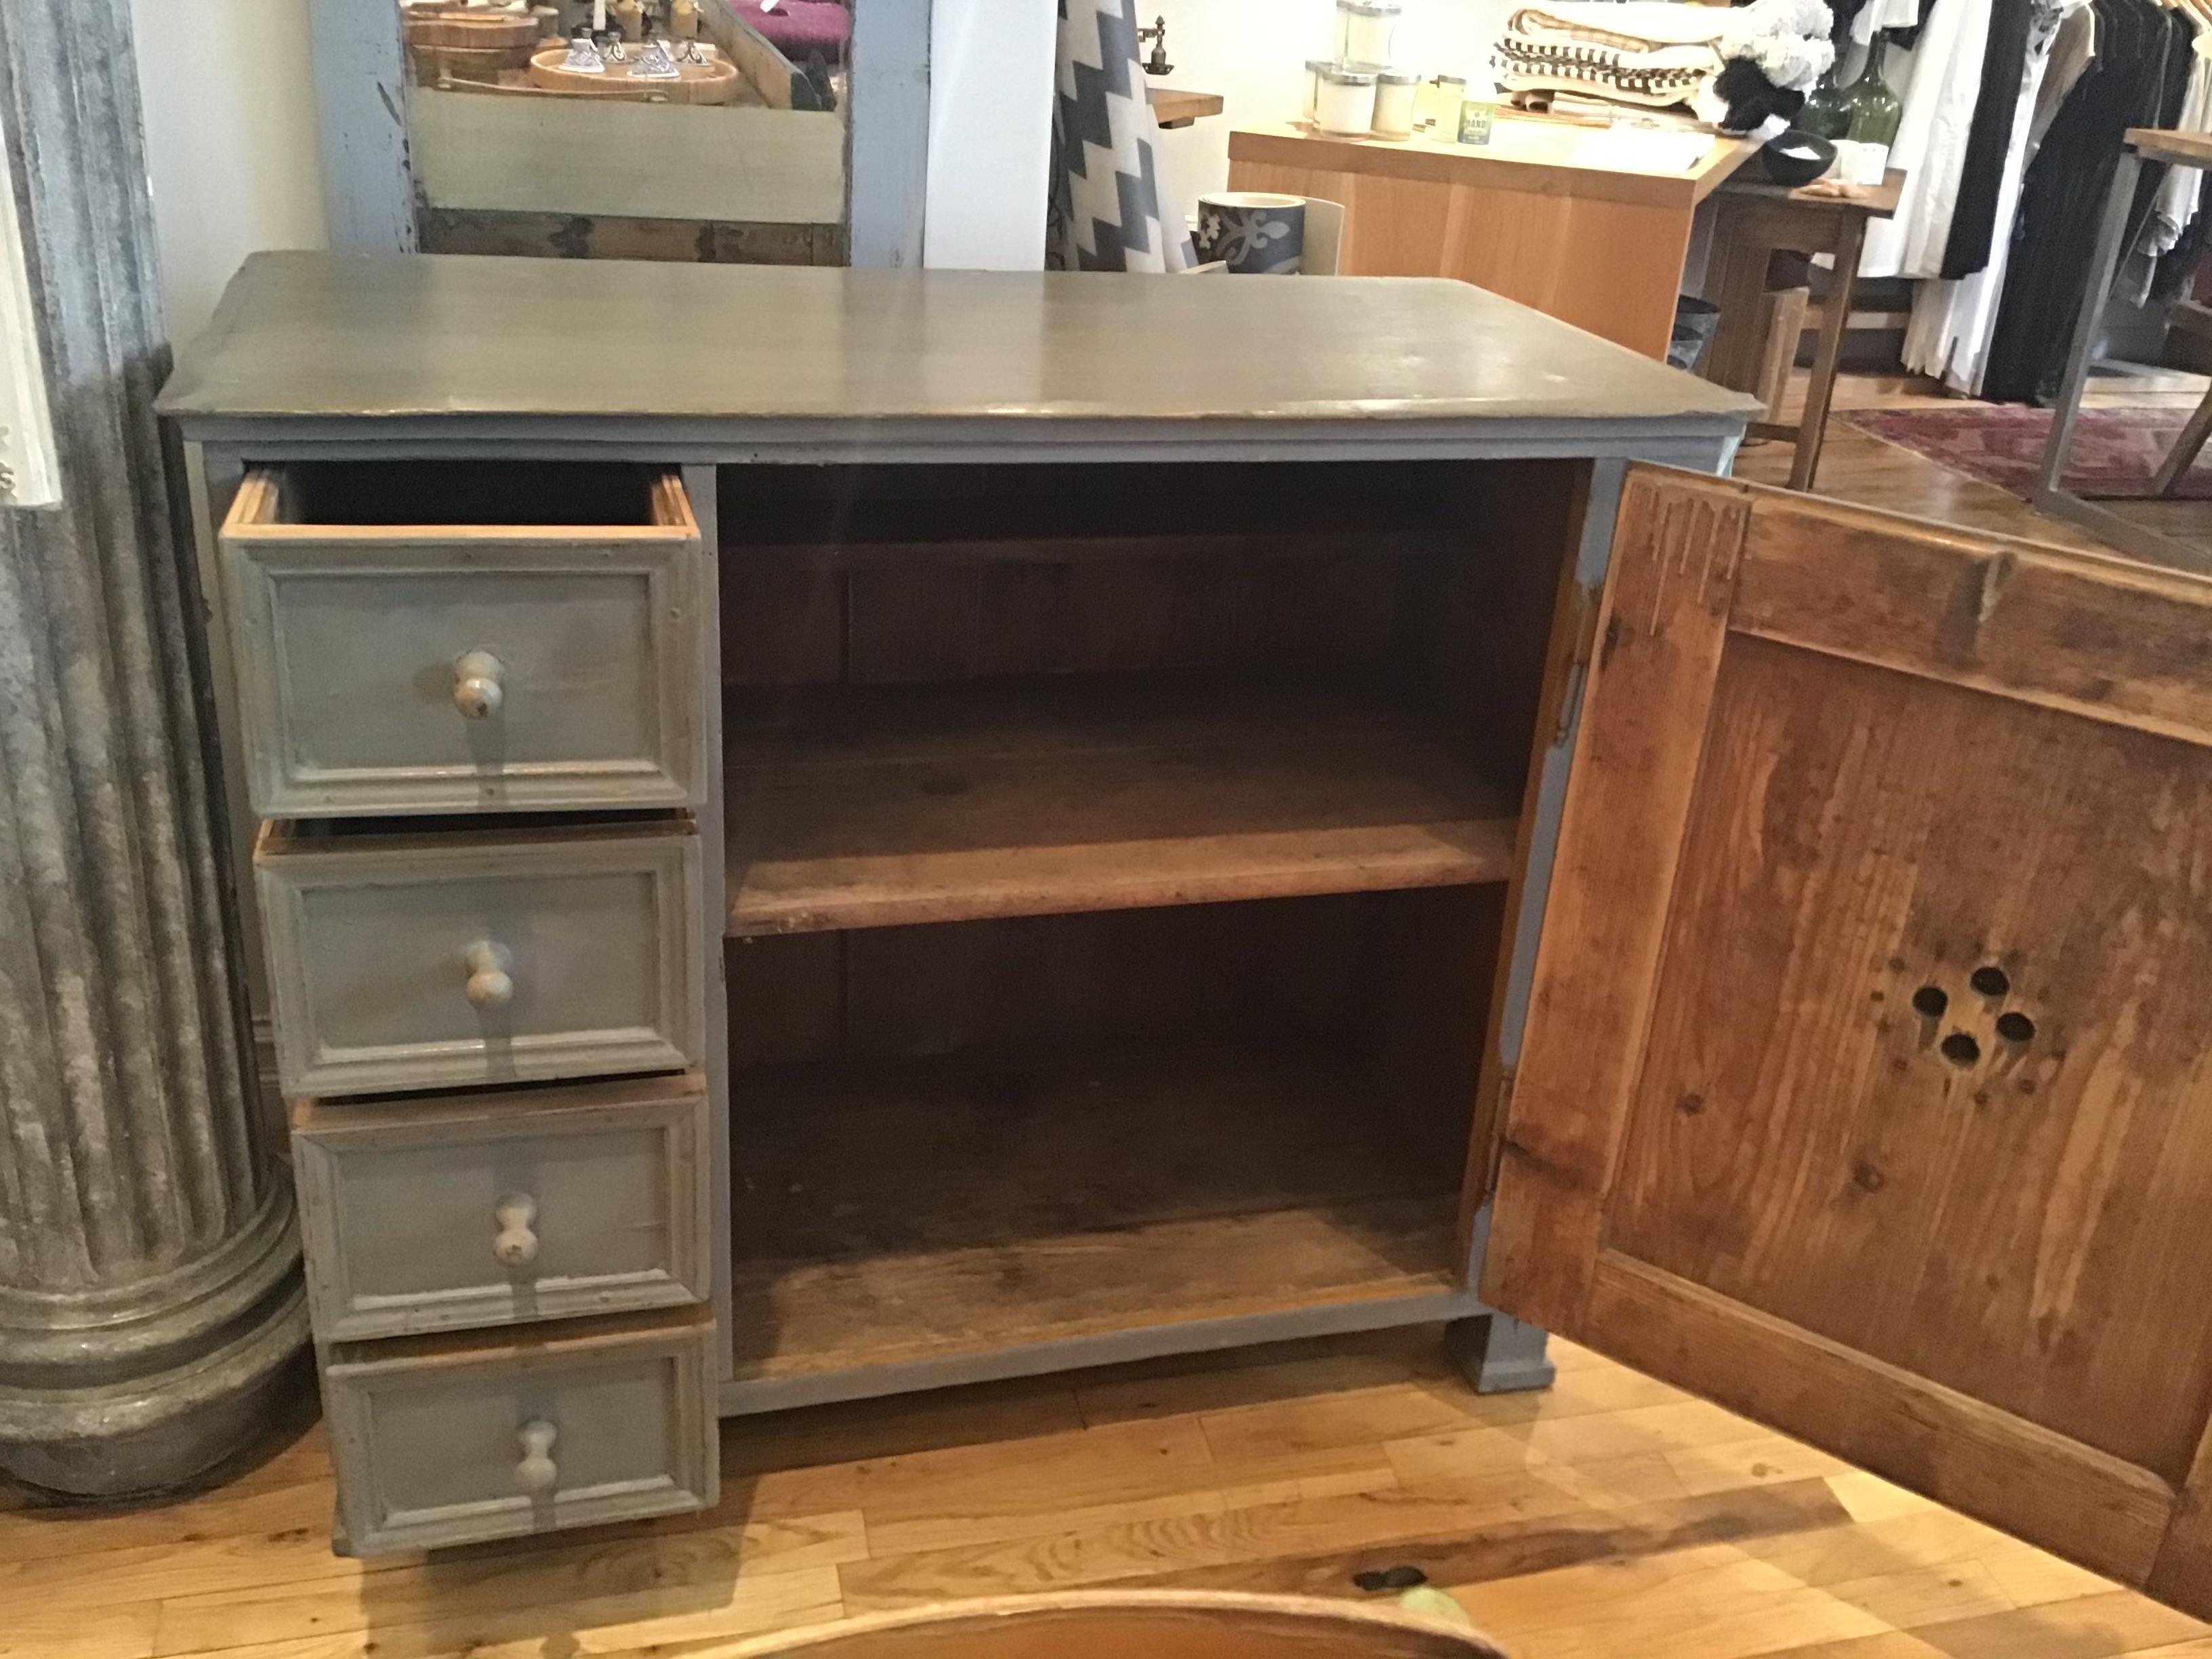 Blueish grey painted vintage French gentleman's chest. Perfect for extra storage in a bedroom or study. With four drawers and one expansive cabinet containing a shelf and sub-shelf. Small enough to fit in limited spaces, large enough for multiple